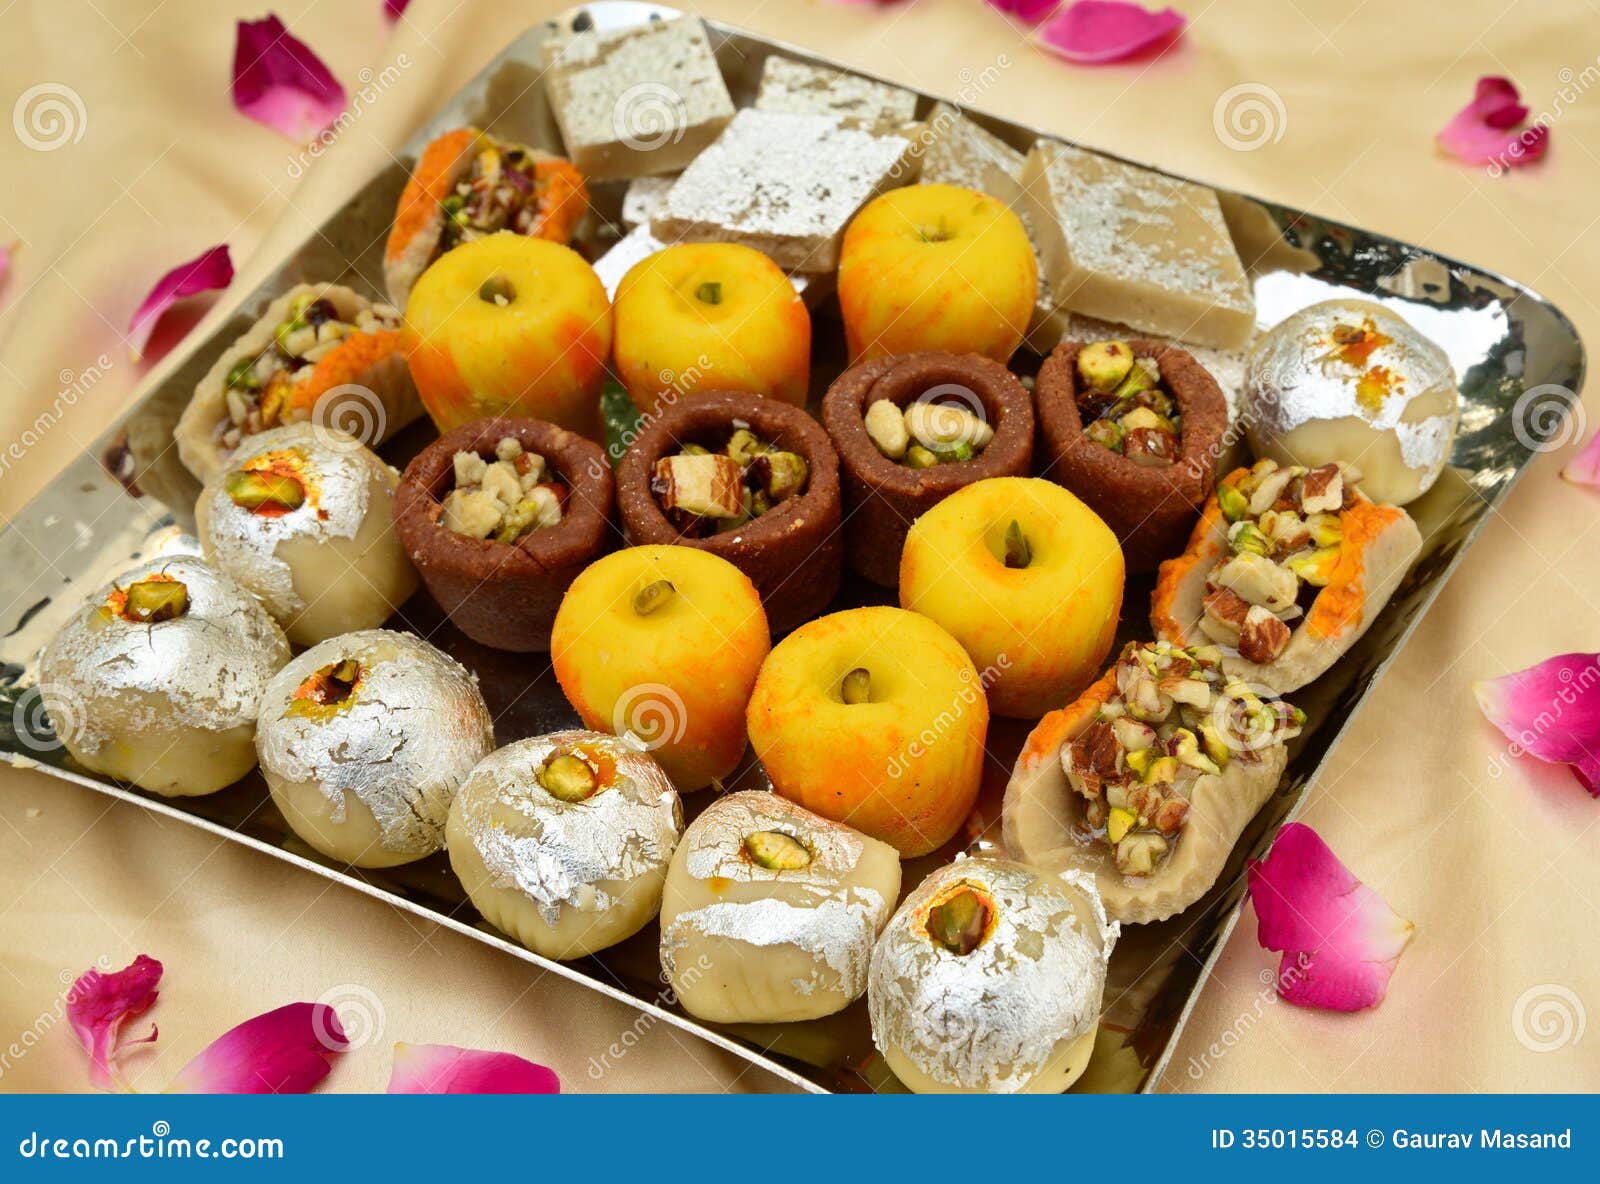 indian-sweets-mithai-india-prepared-out-milk-product-sugar-aromatic-ingredients-35015584.jpg